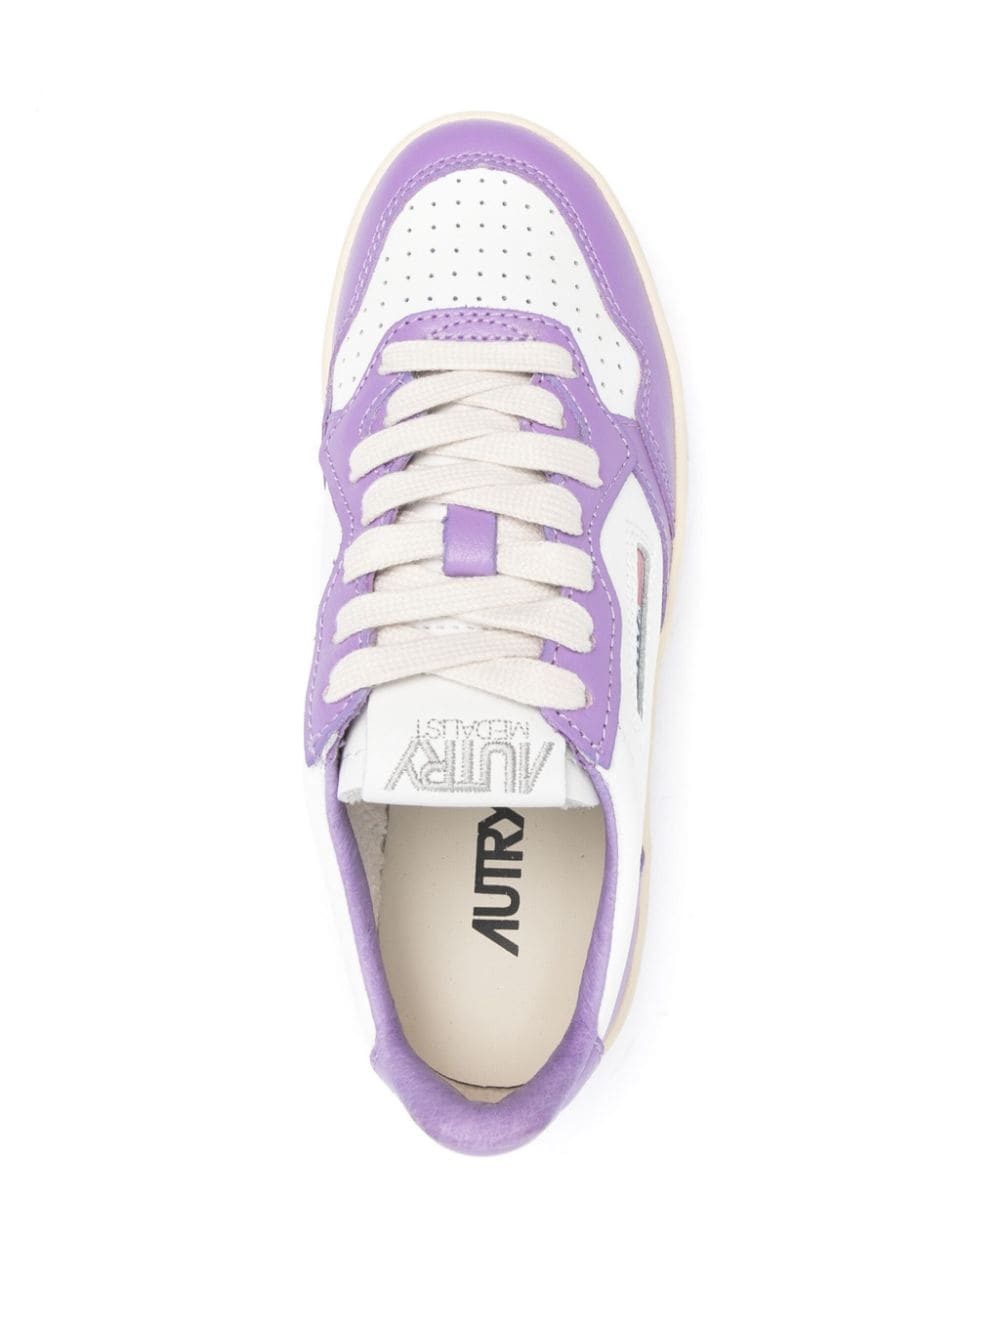 AUTRY AUTRY- Platform Low Leather Sneakers